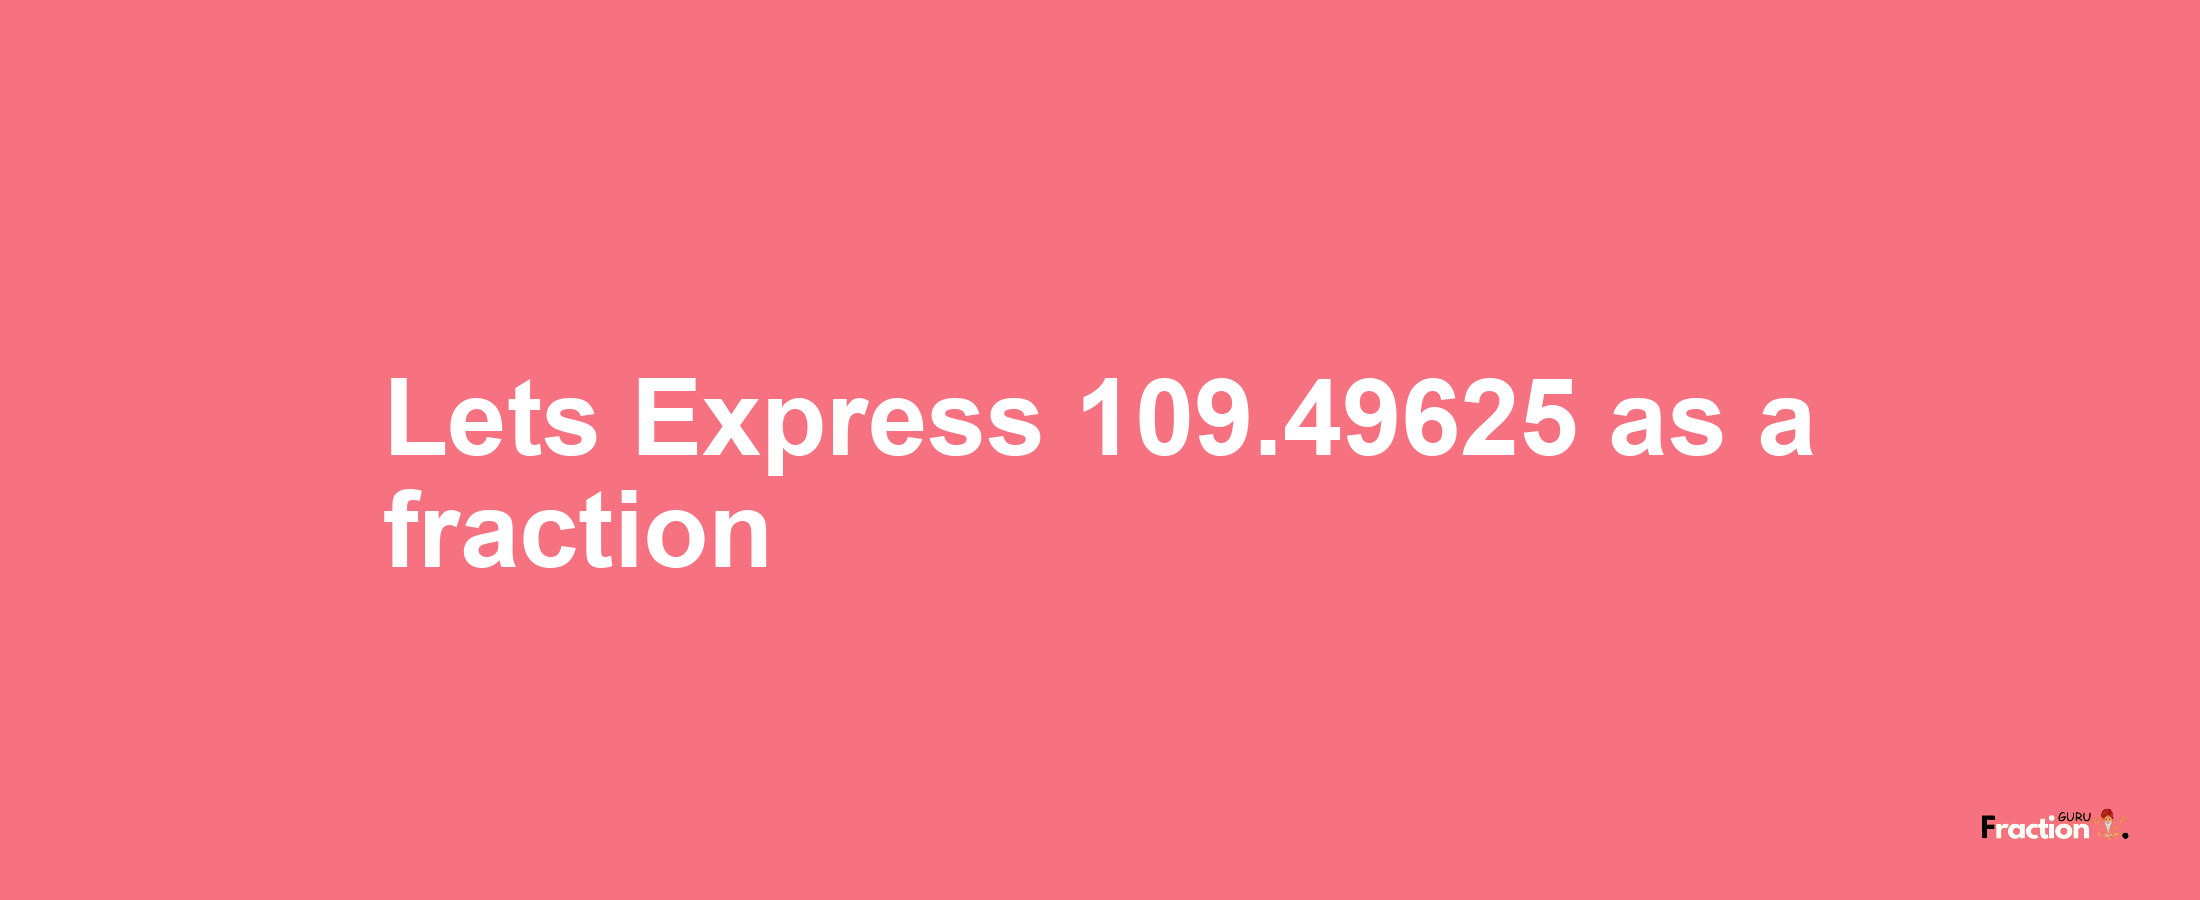 Lets Express 109.49625 as afraction